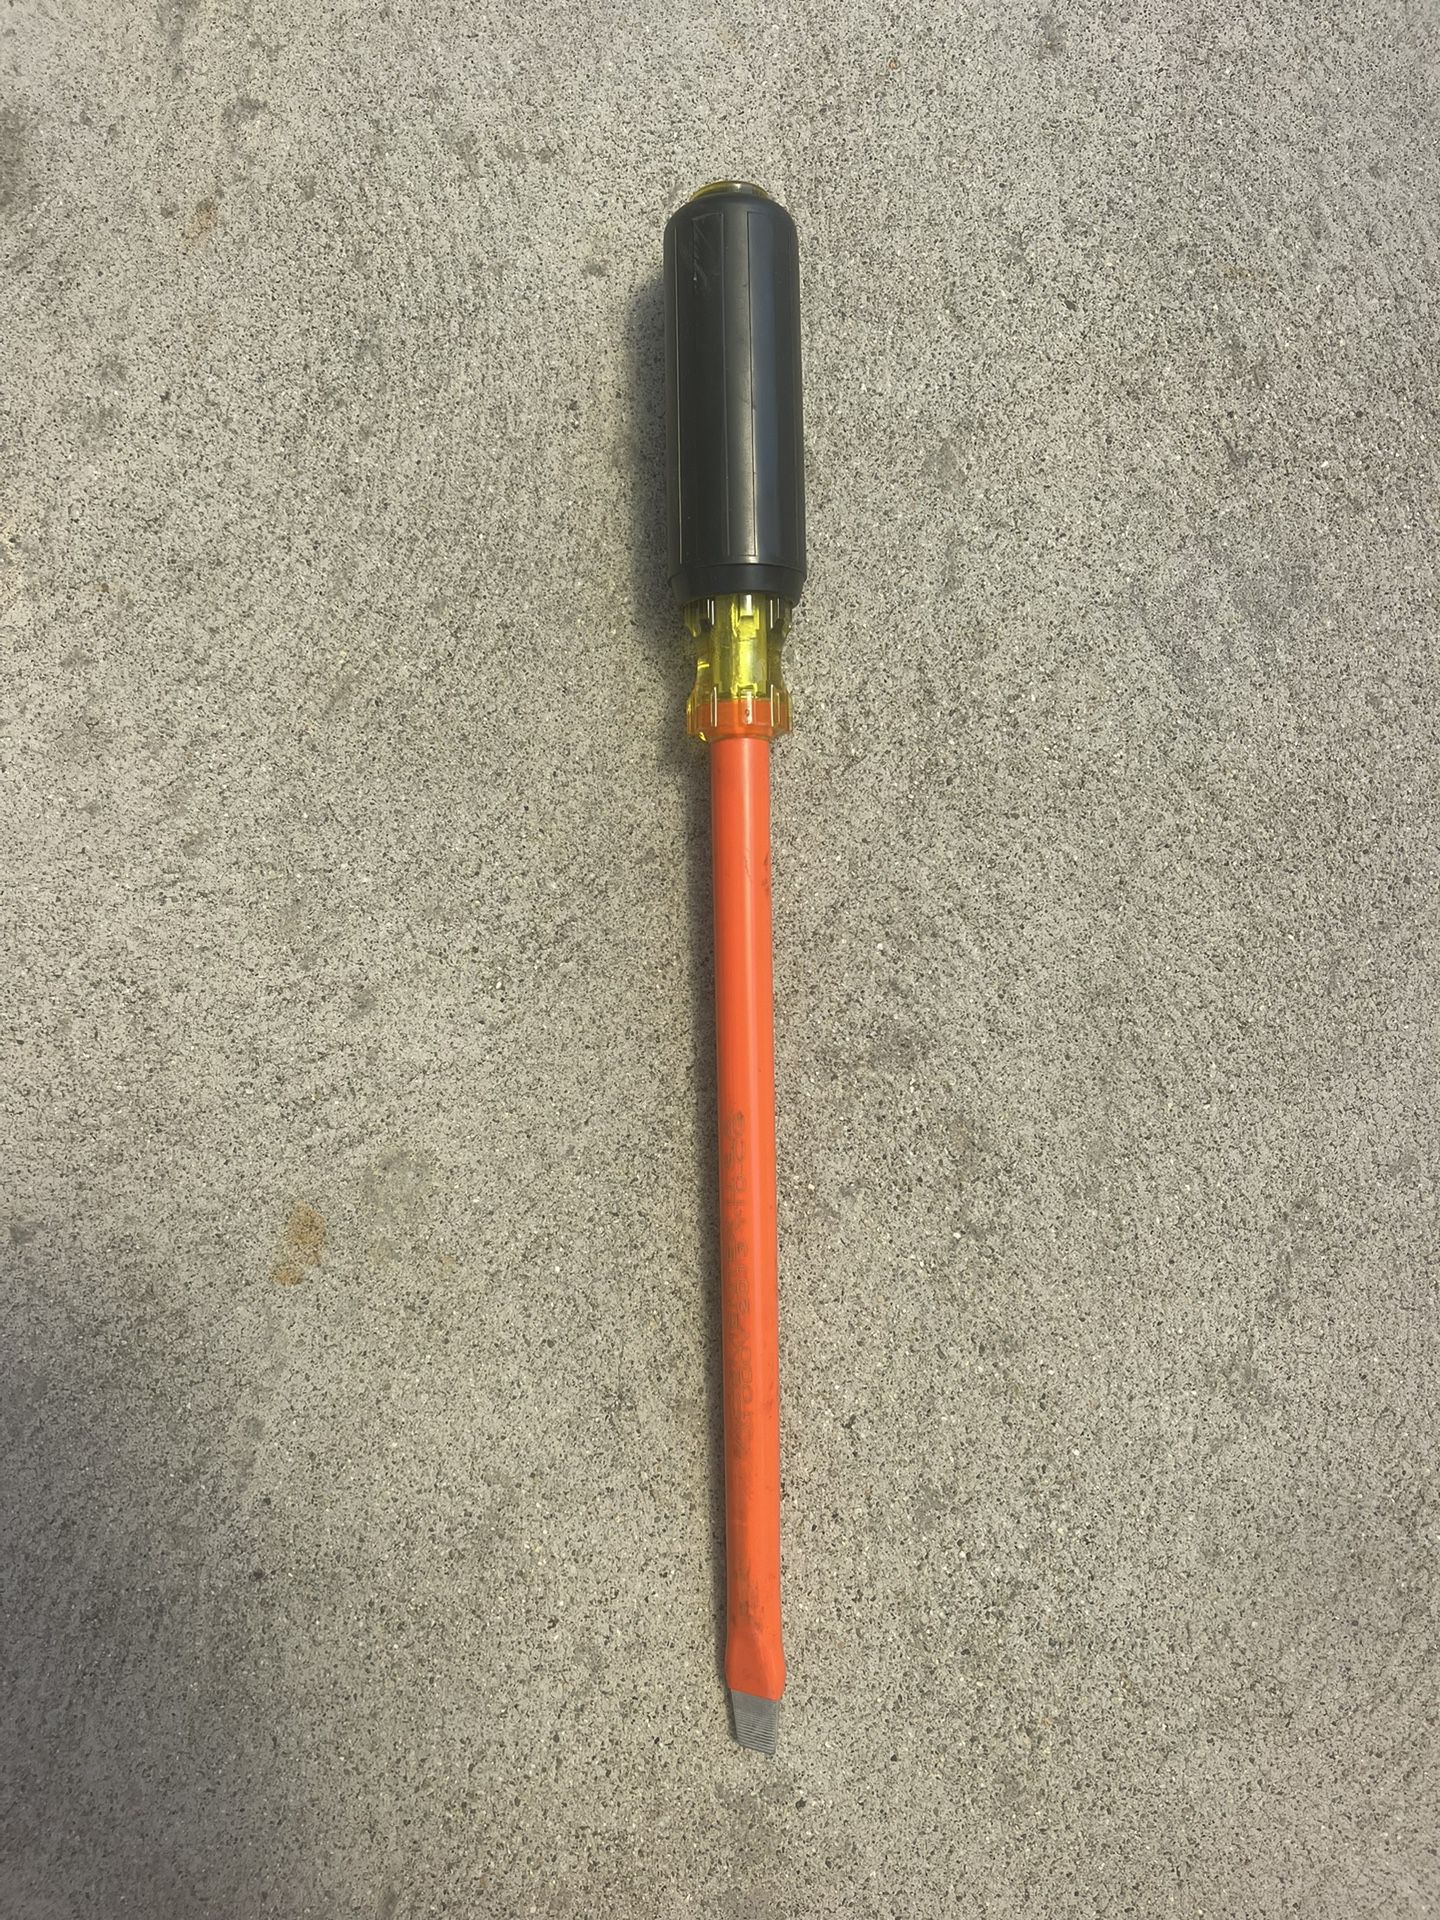 Insulated Screw Driver